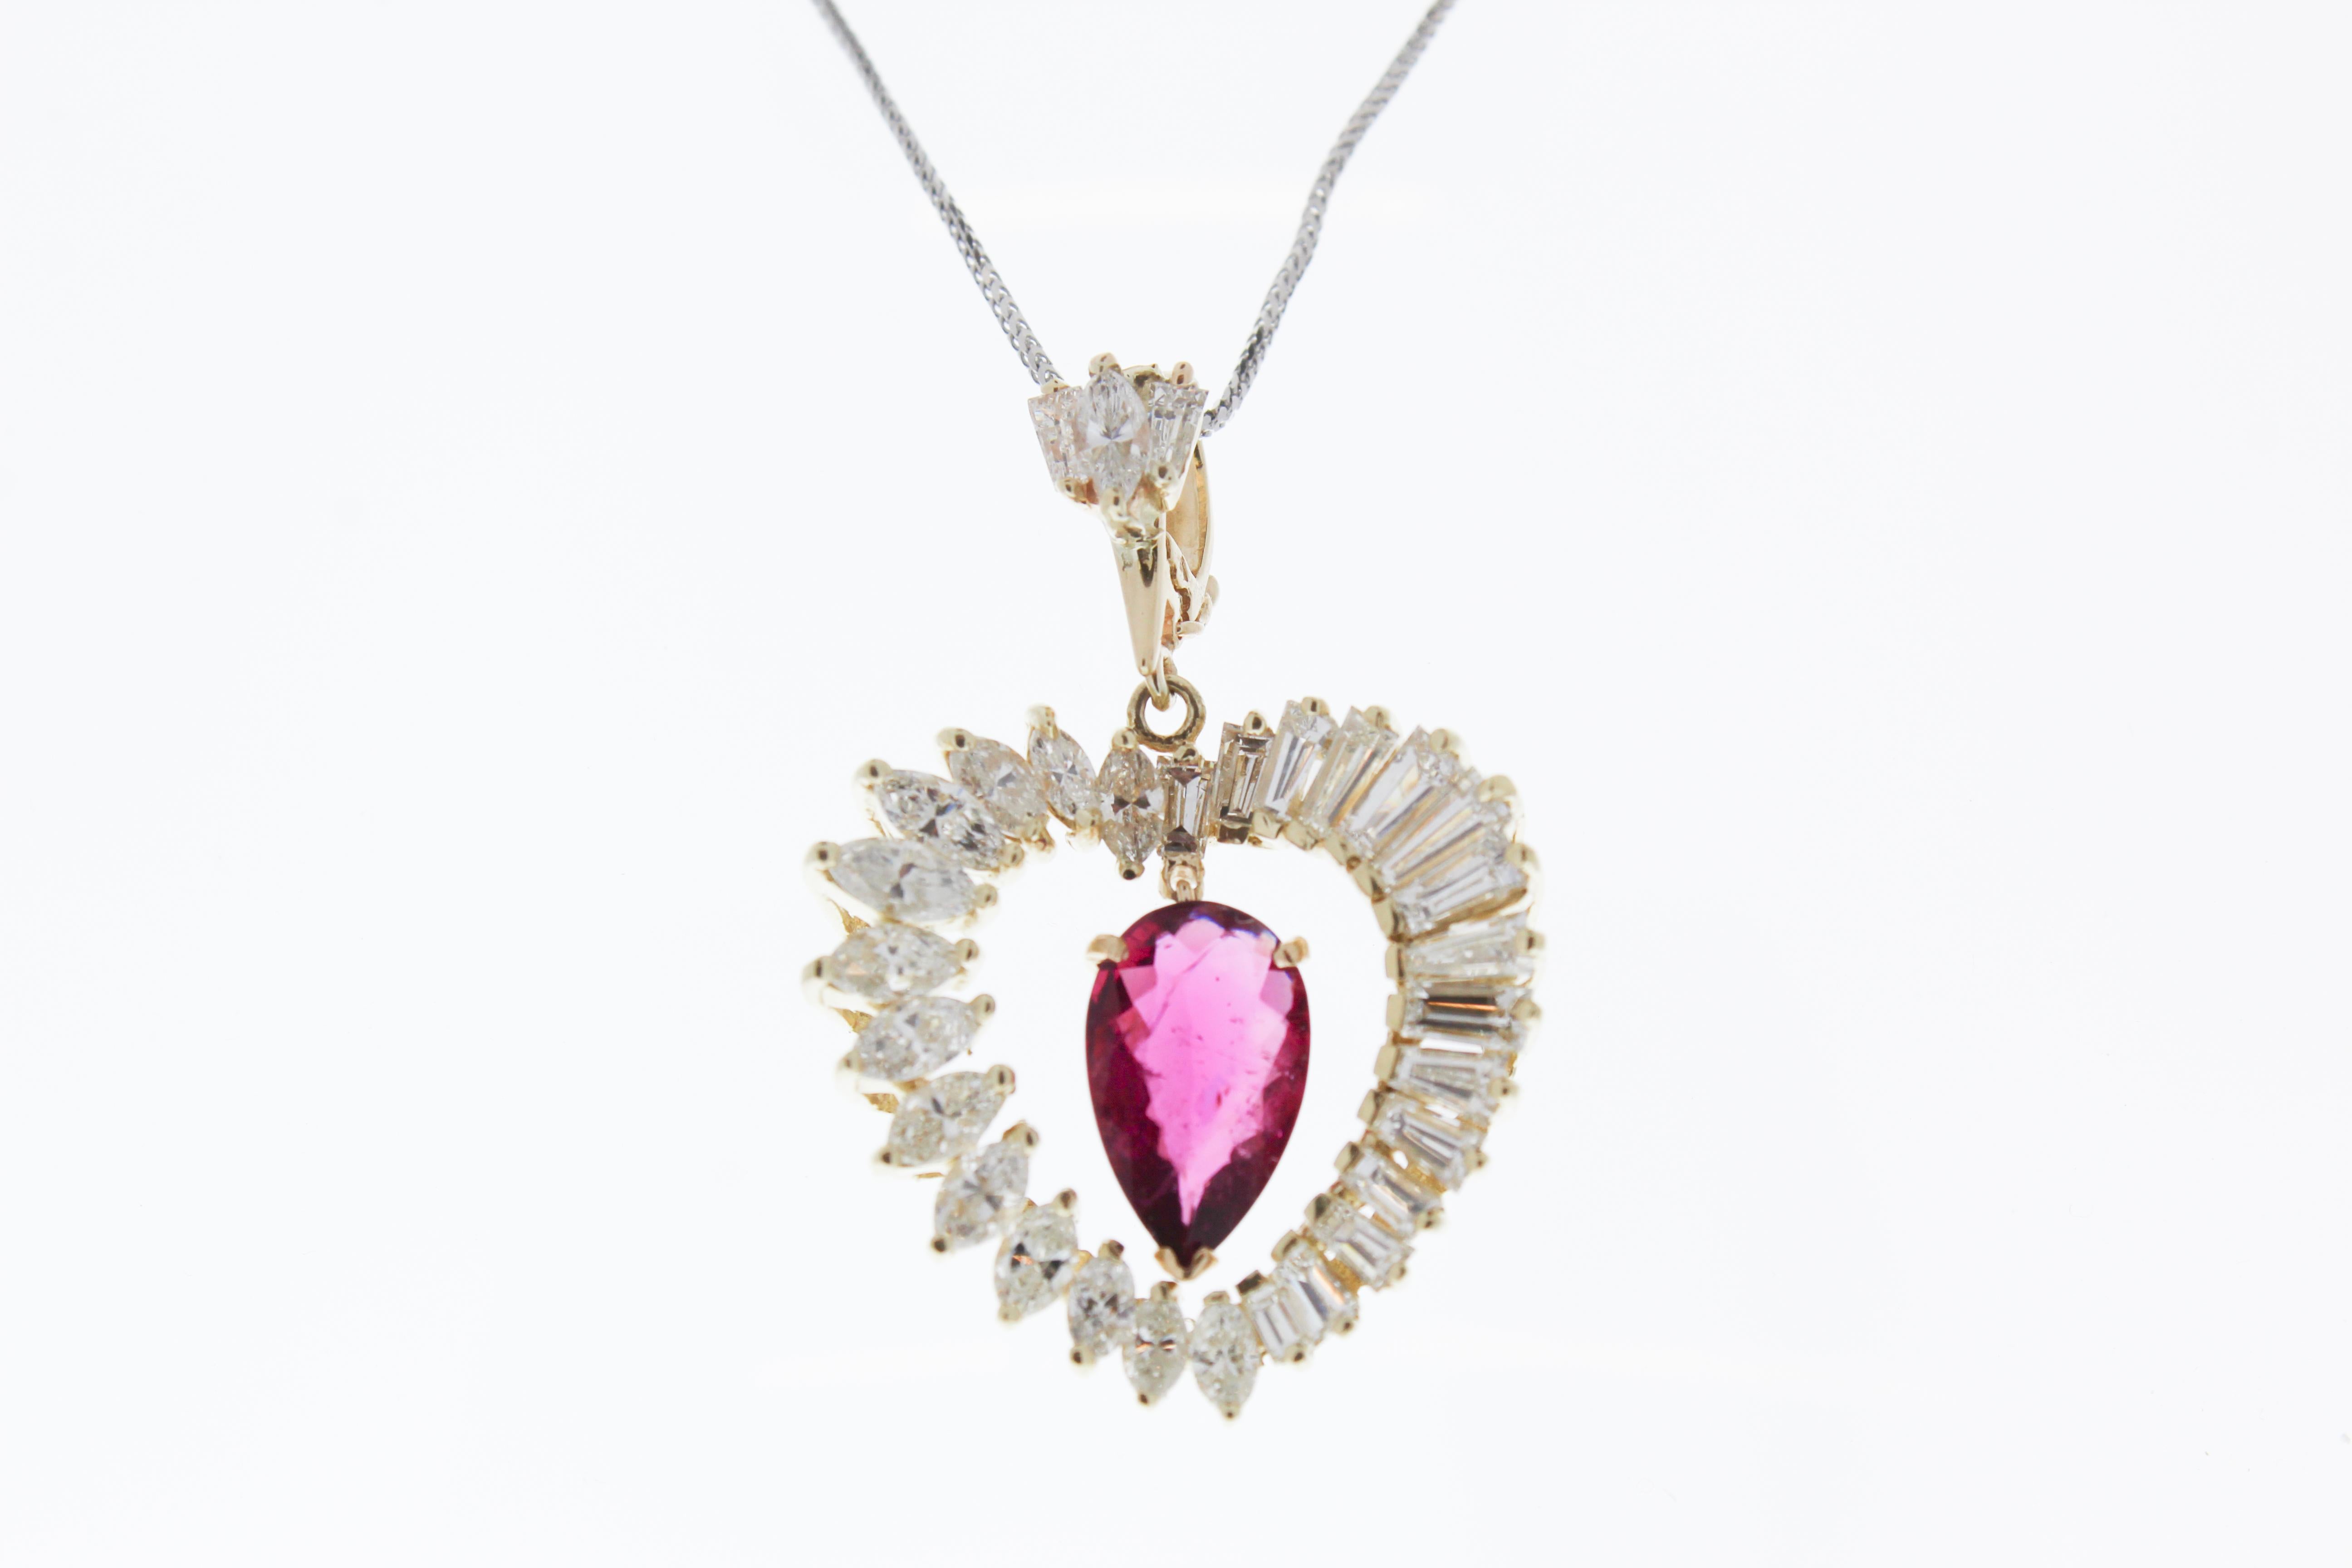 Emerald Cut 2.51 Carat Pink Rubellite Heart Shape Pendants In Yellow Gold  For Sale